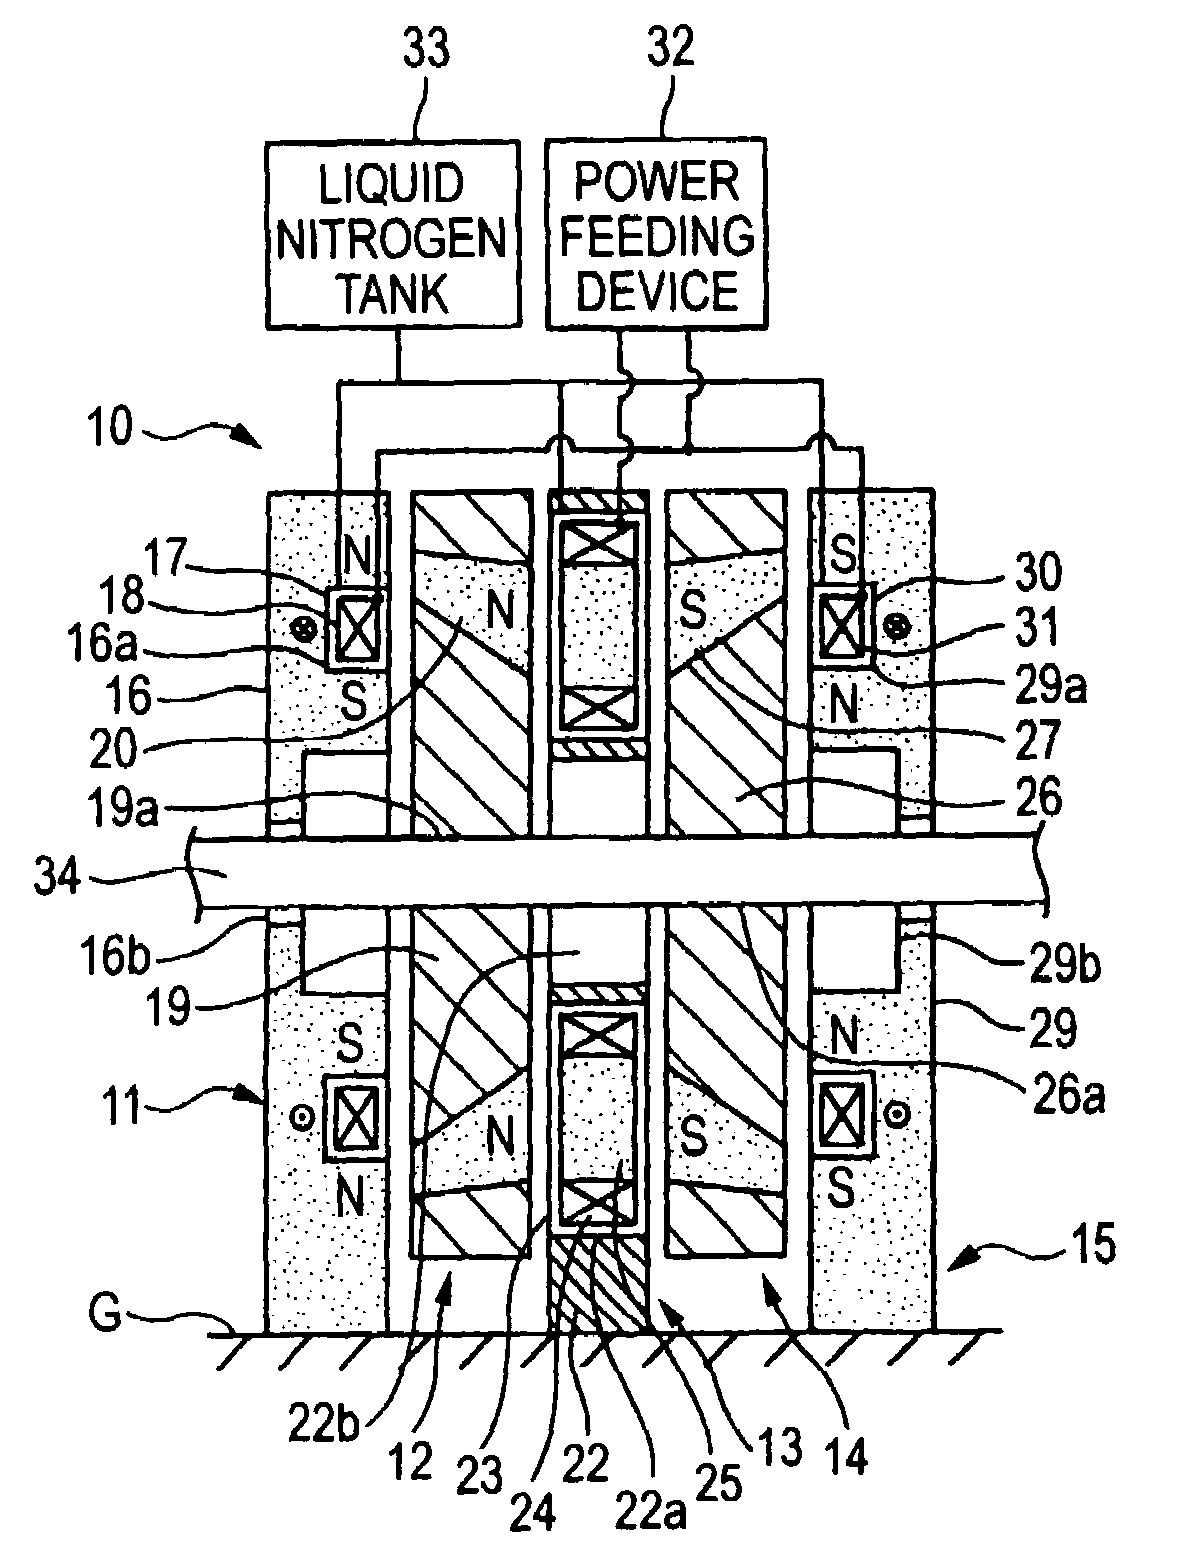 Inductor-type synchronous machine